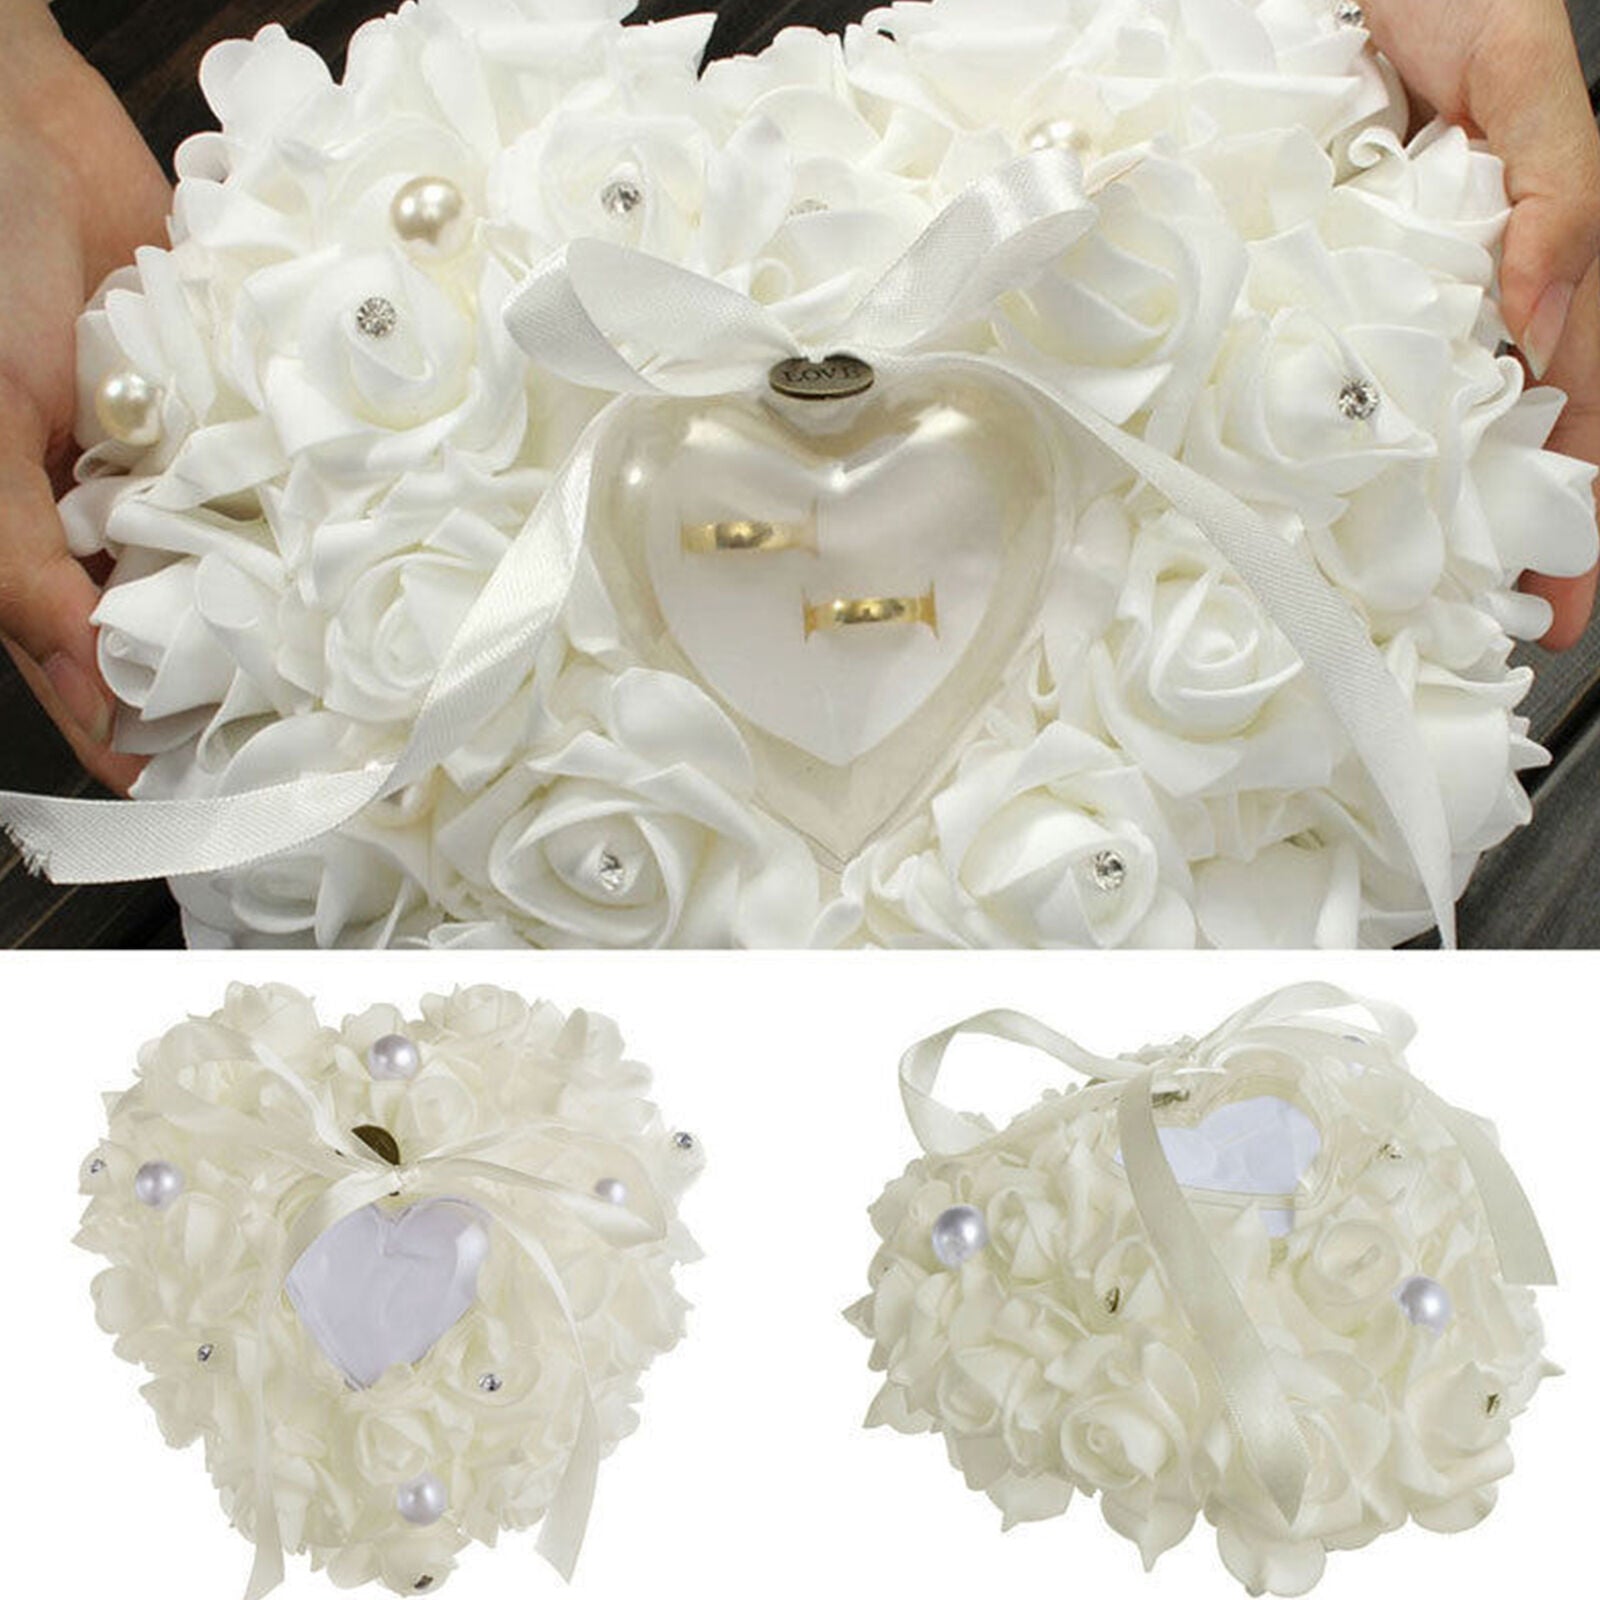 Wedding Ceremony White Satin Crystal Flower Ring Bearer Pillow Cushion Gifts